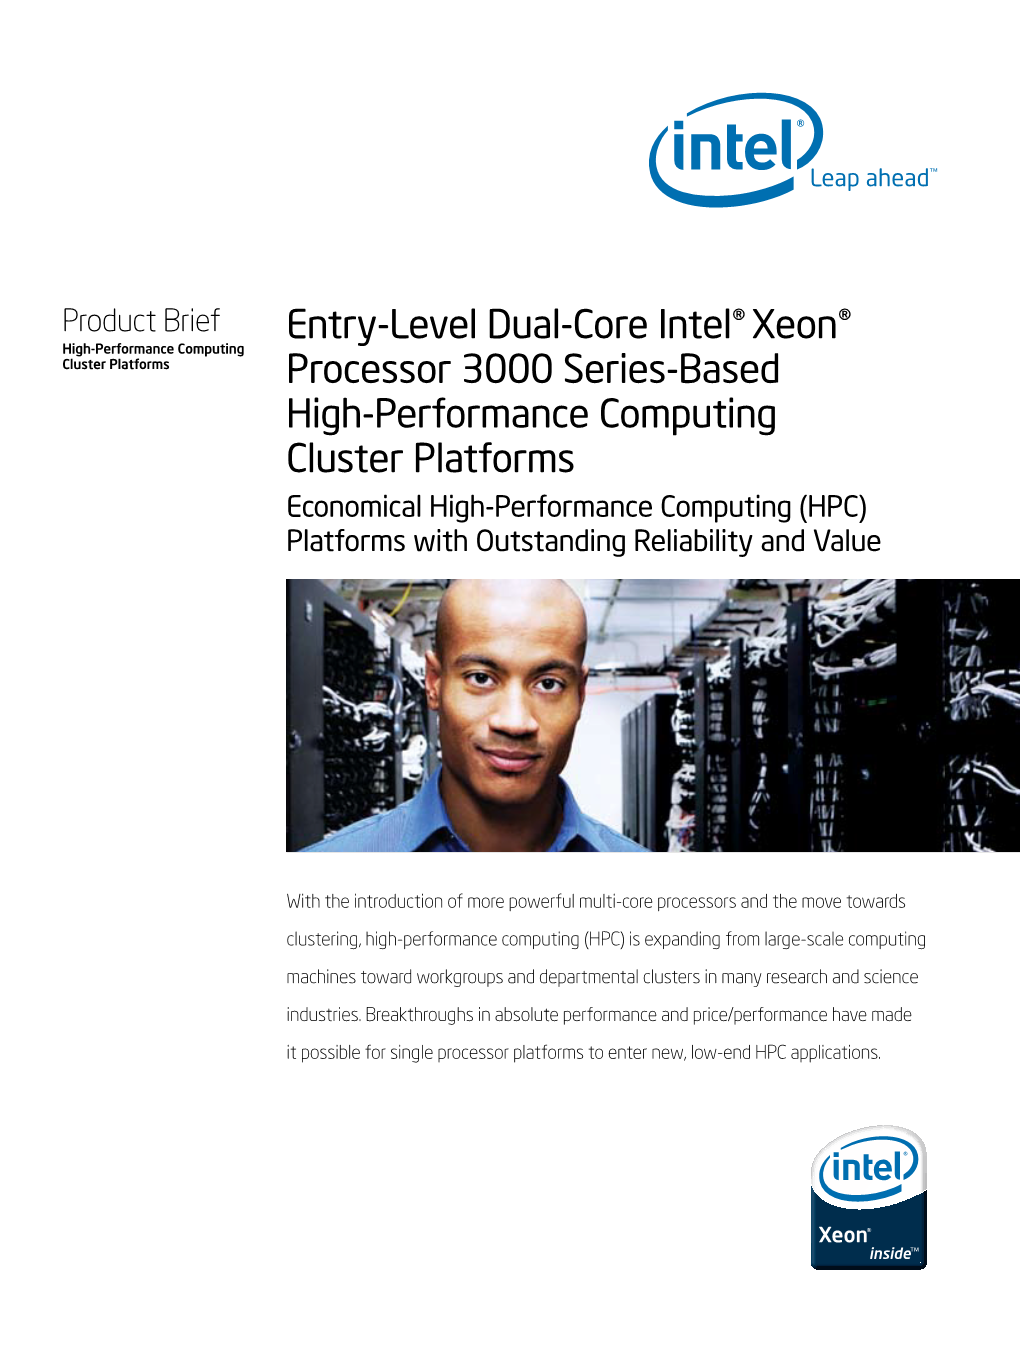 Entry-Level Dual-Core Intel® Xeon® Processor 3000 Series-Based High